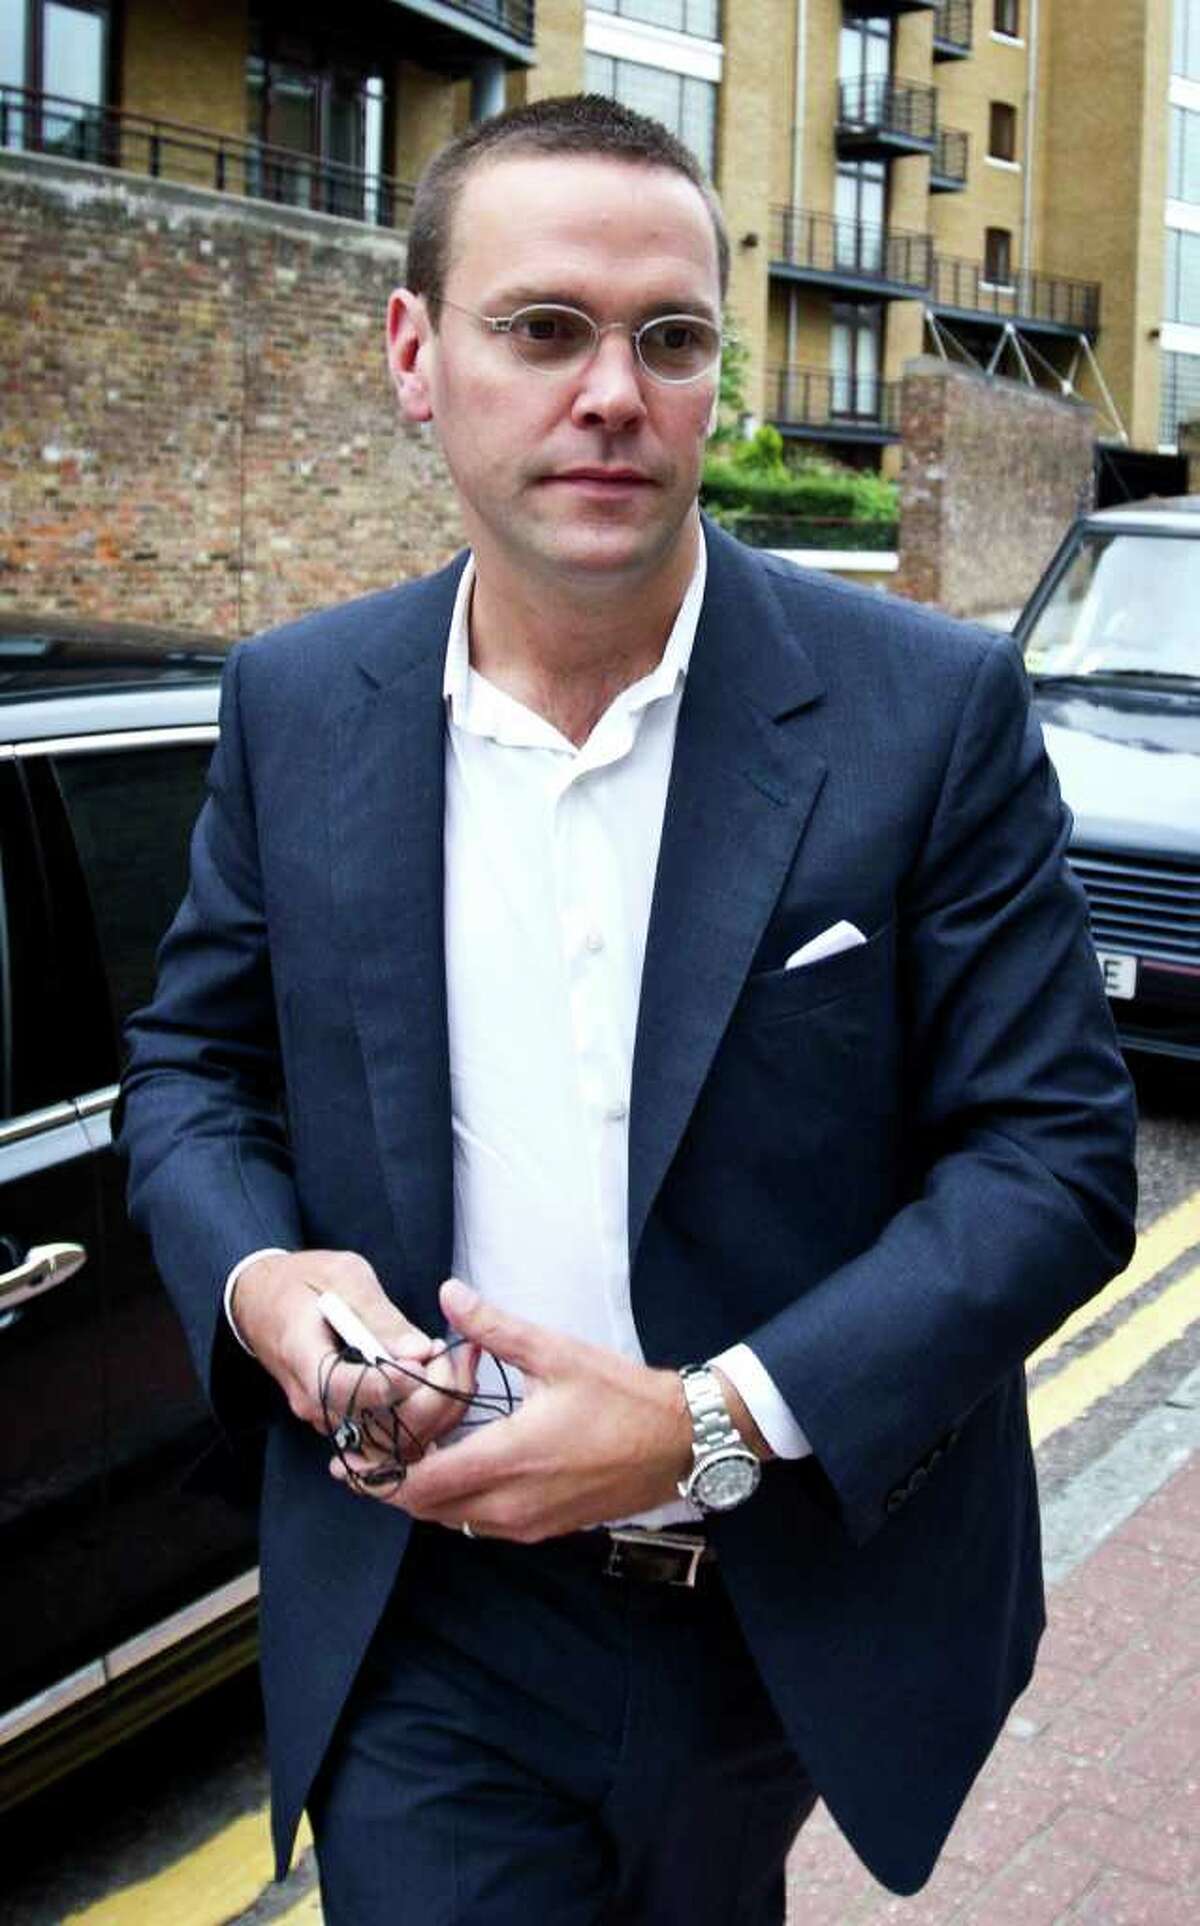 (FILES) A file picture taken on July 13, 2011, shows James Murdoch arriving for work in east London. James Murdoch has resigned as a director of several British newspapers including The Sun and The Times, documents and sources said Wednesday November 23, 2011, in the latest shake-up at his father Rupert's empire. AFP PHOTO / Warren Allott (Photo credit should read Warren Allott/AFP/Getty Images)